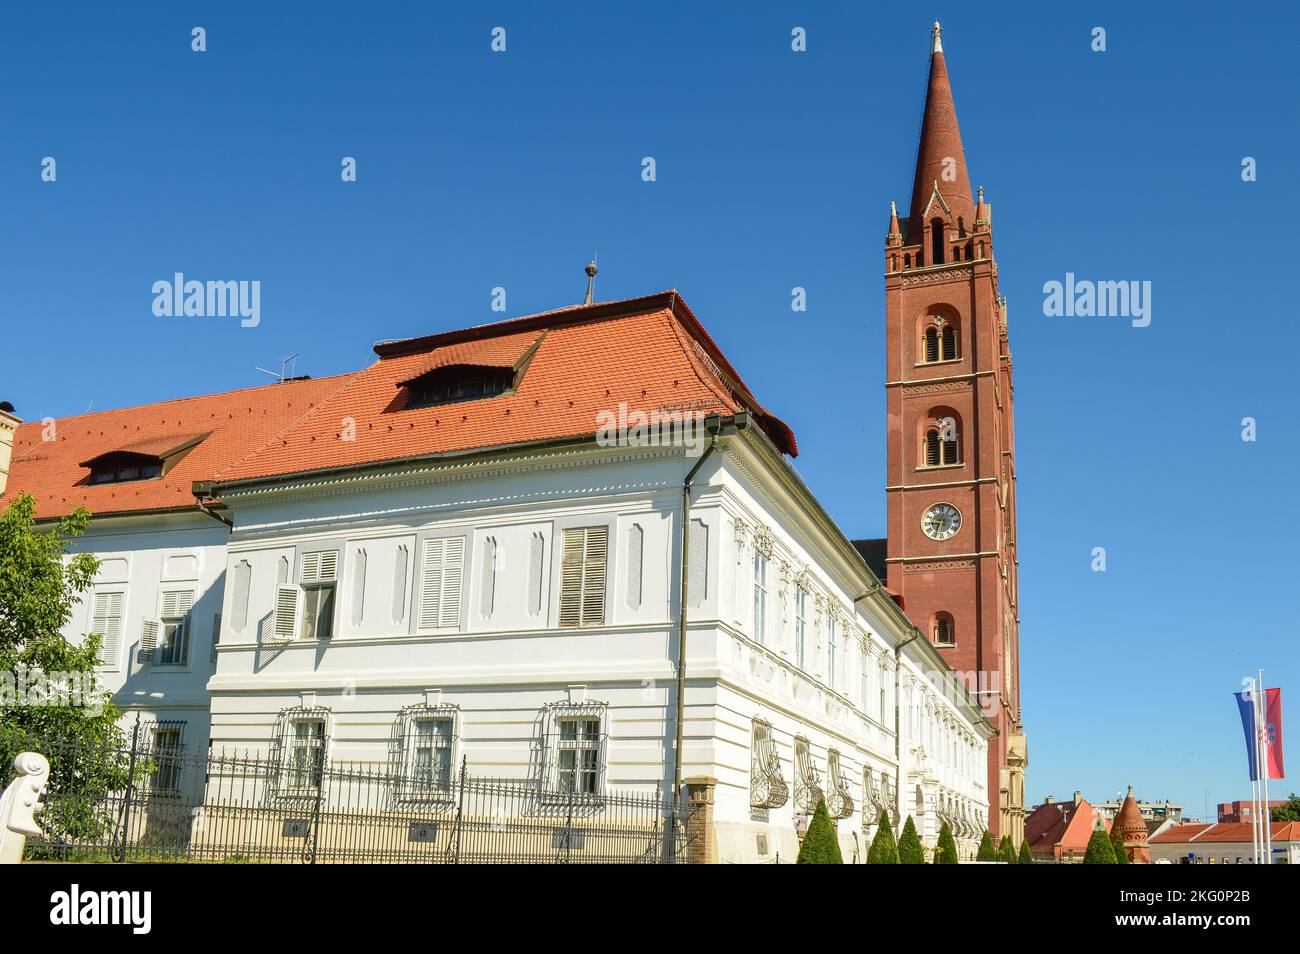 The Đakovo Cathedral or Cathedral basilica of St. Peter is the cathedral of the Roman Catholic Archdiocese of Đakovo-Osijek in Đakovo, Croatia. Stock Photo